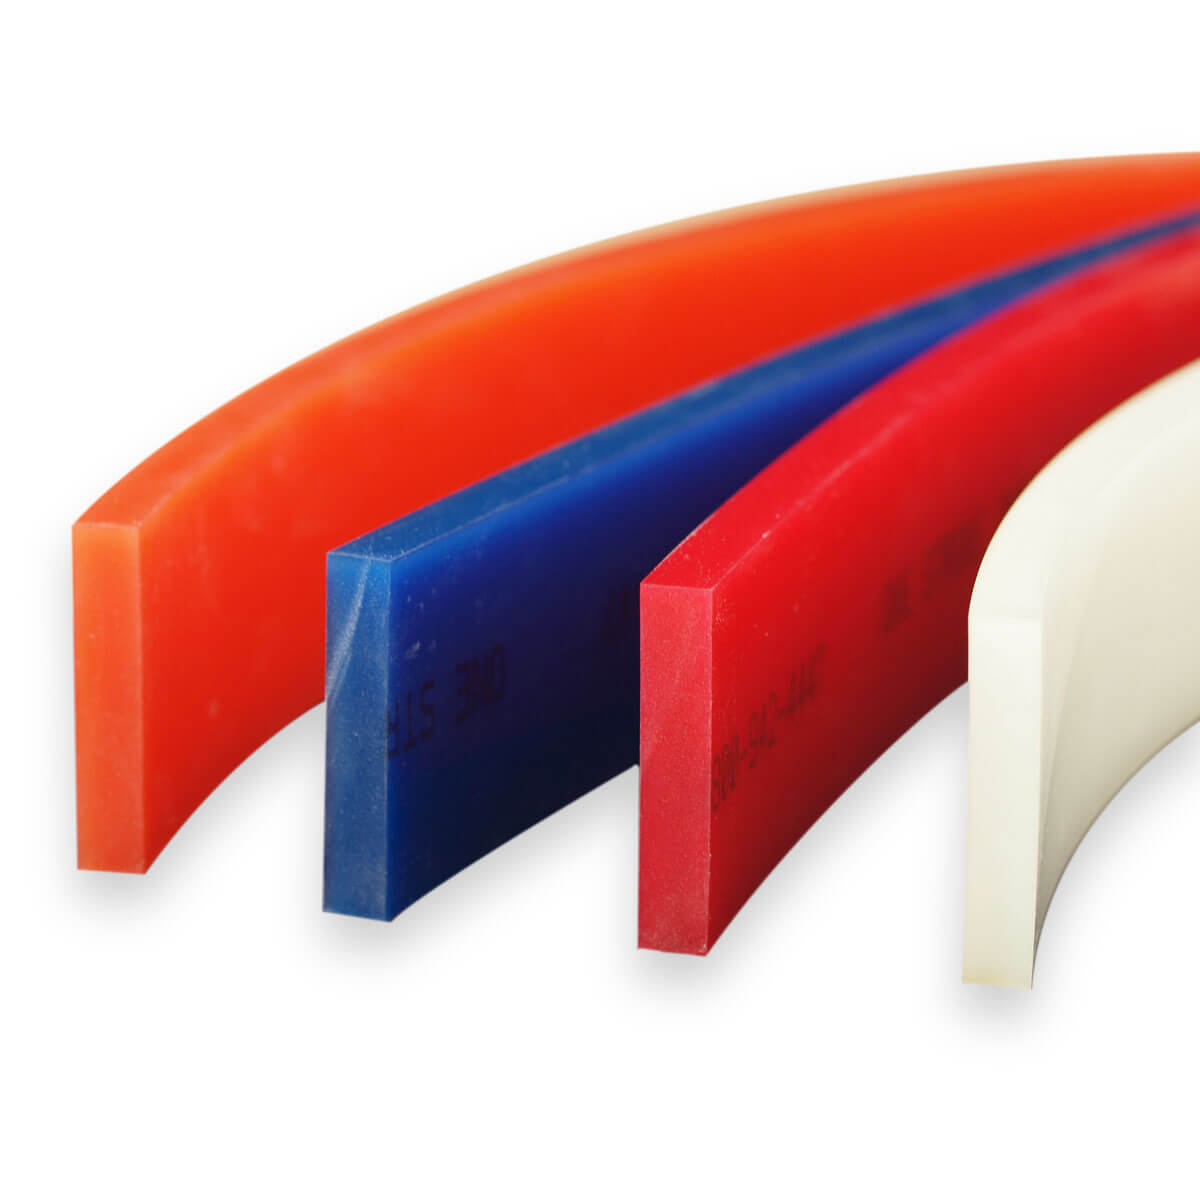 Squeegee Rubber: Squeegee blades for screen printing textiles